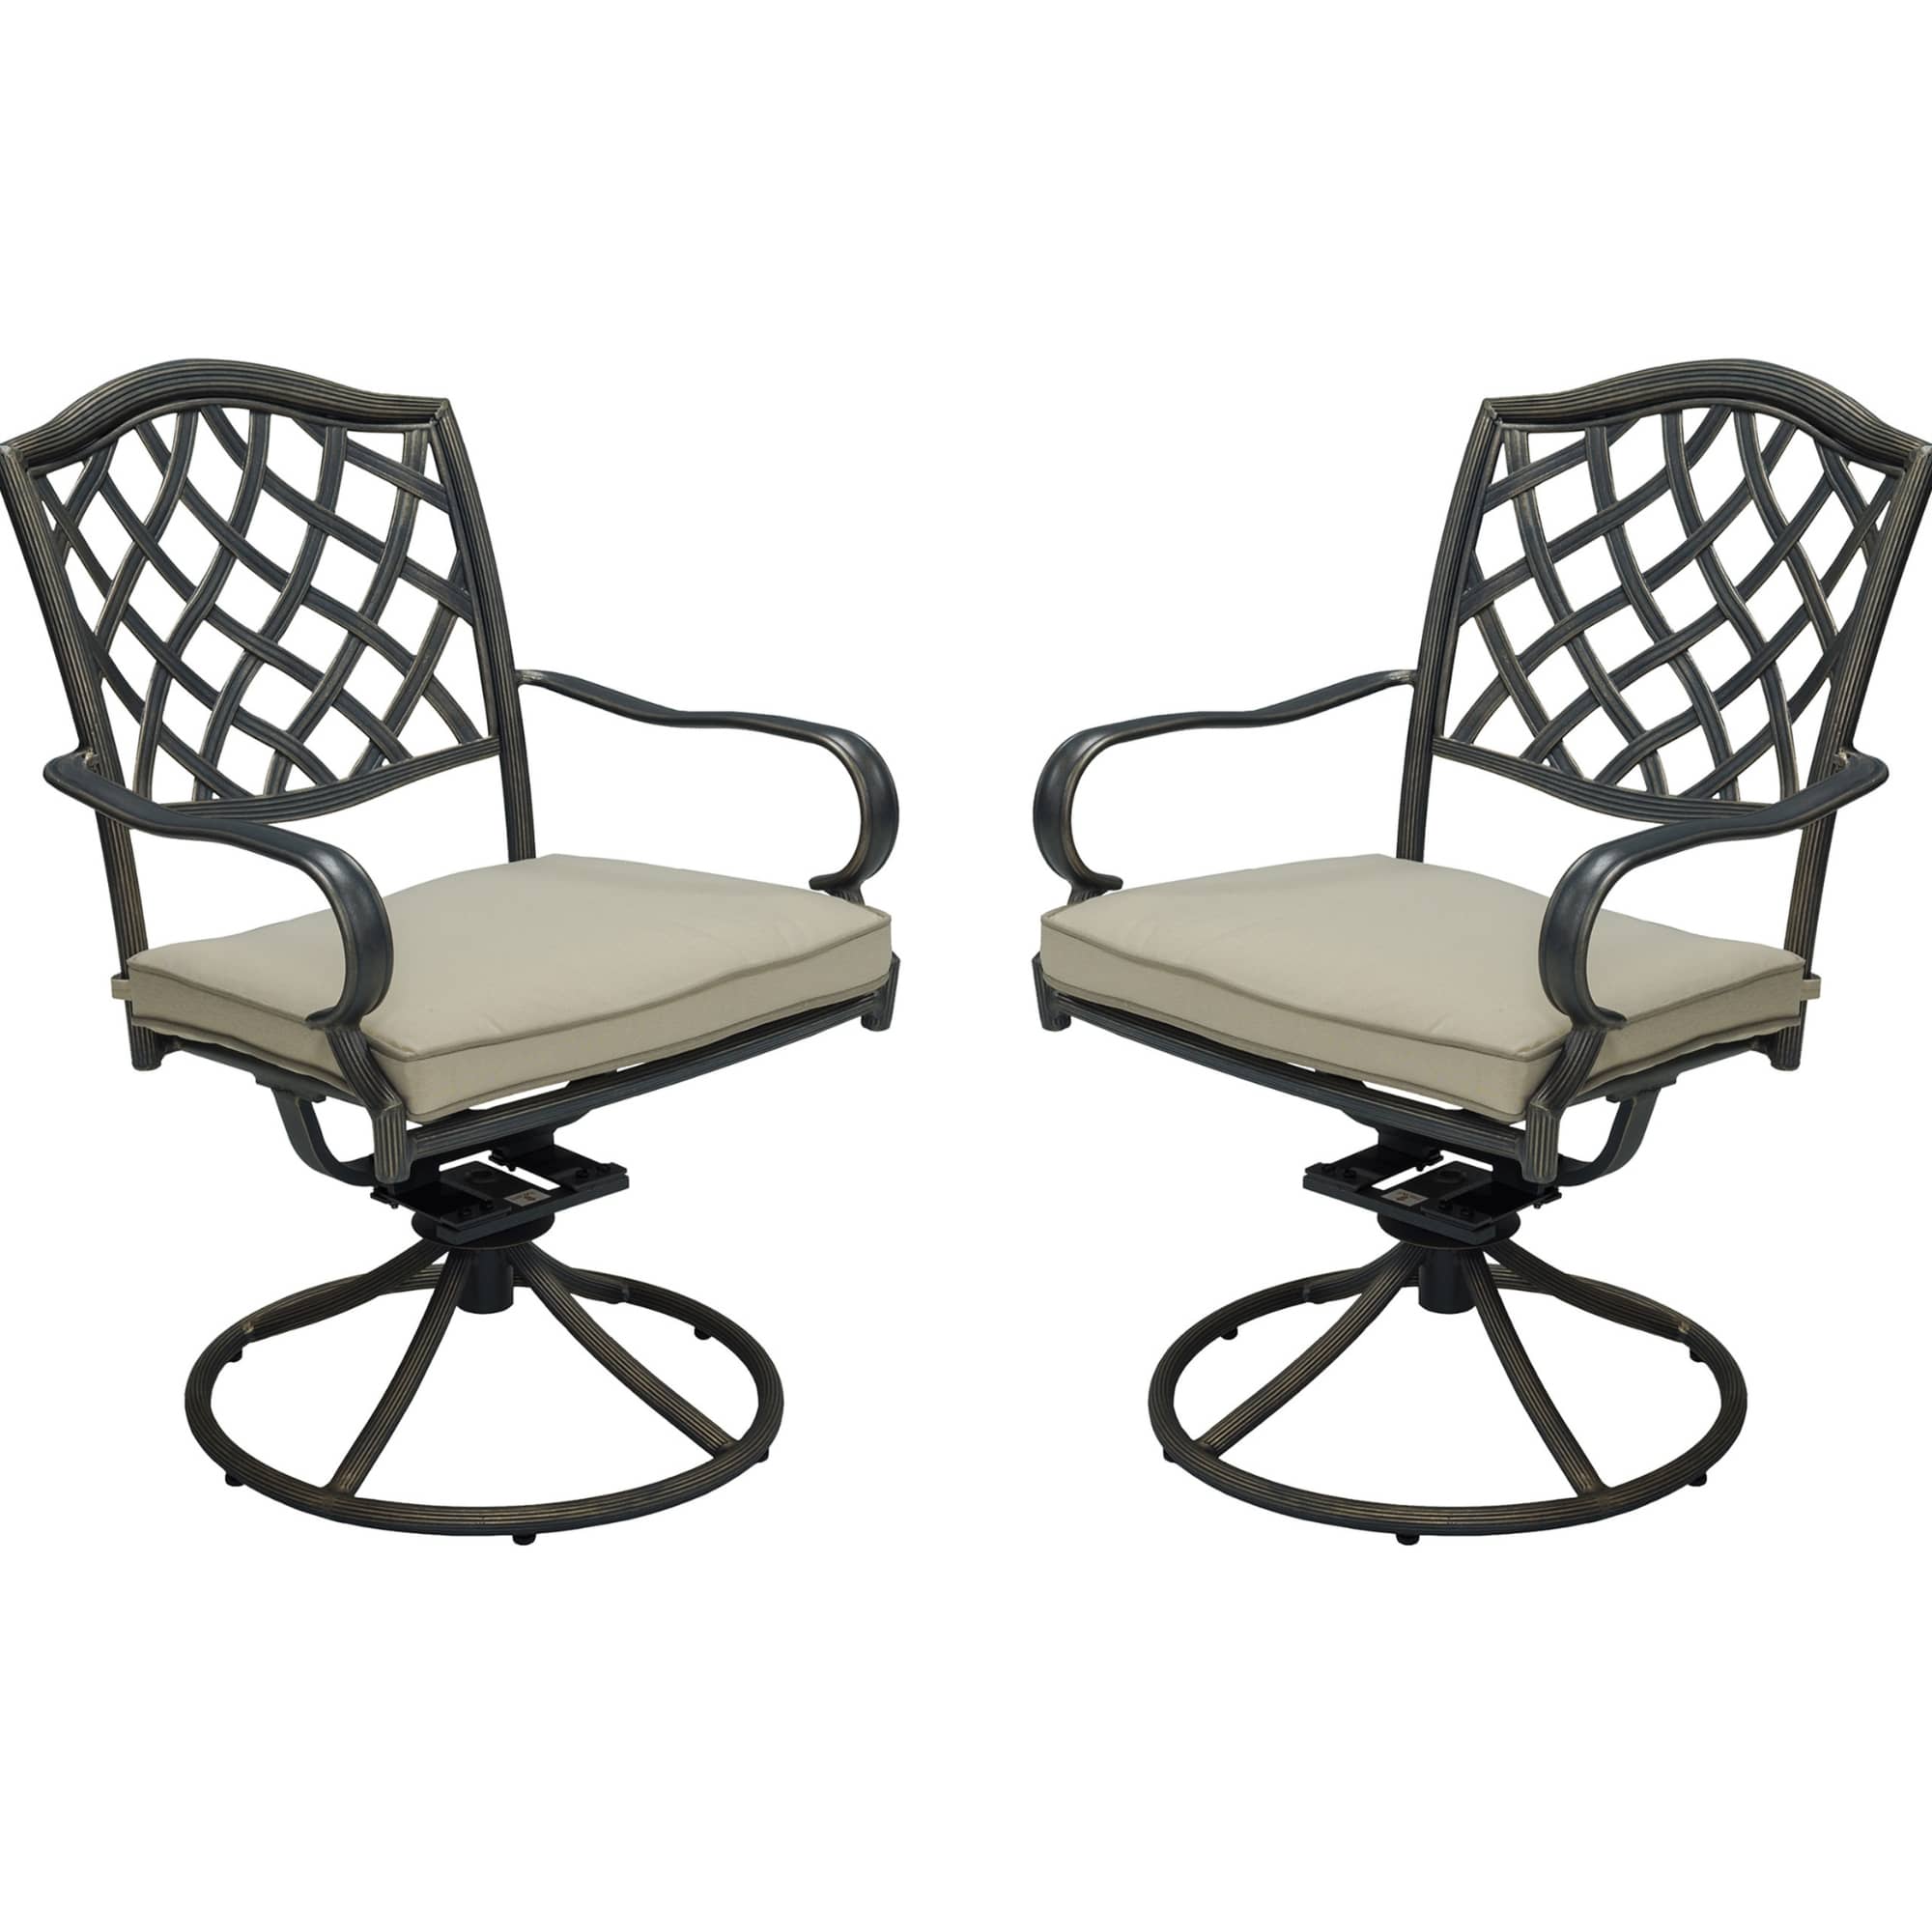 2-Piece Brown Cast Aluminum Outdoor Swivel Dining Chair Patio Bistro Chairs with Cushion